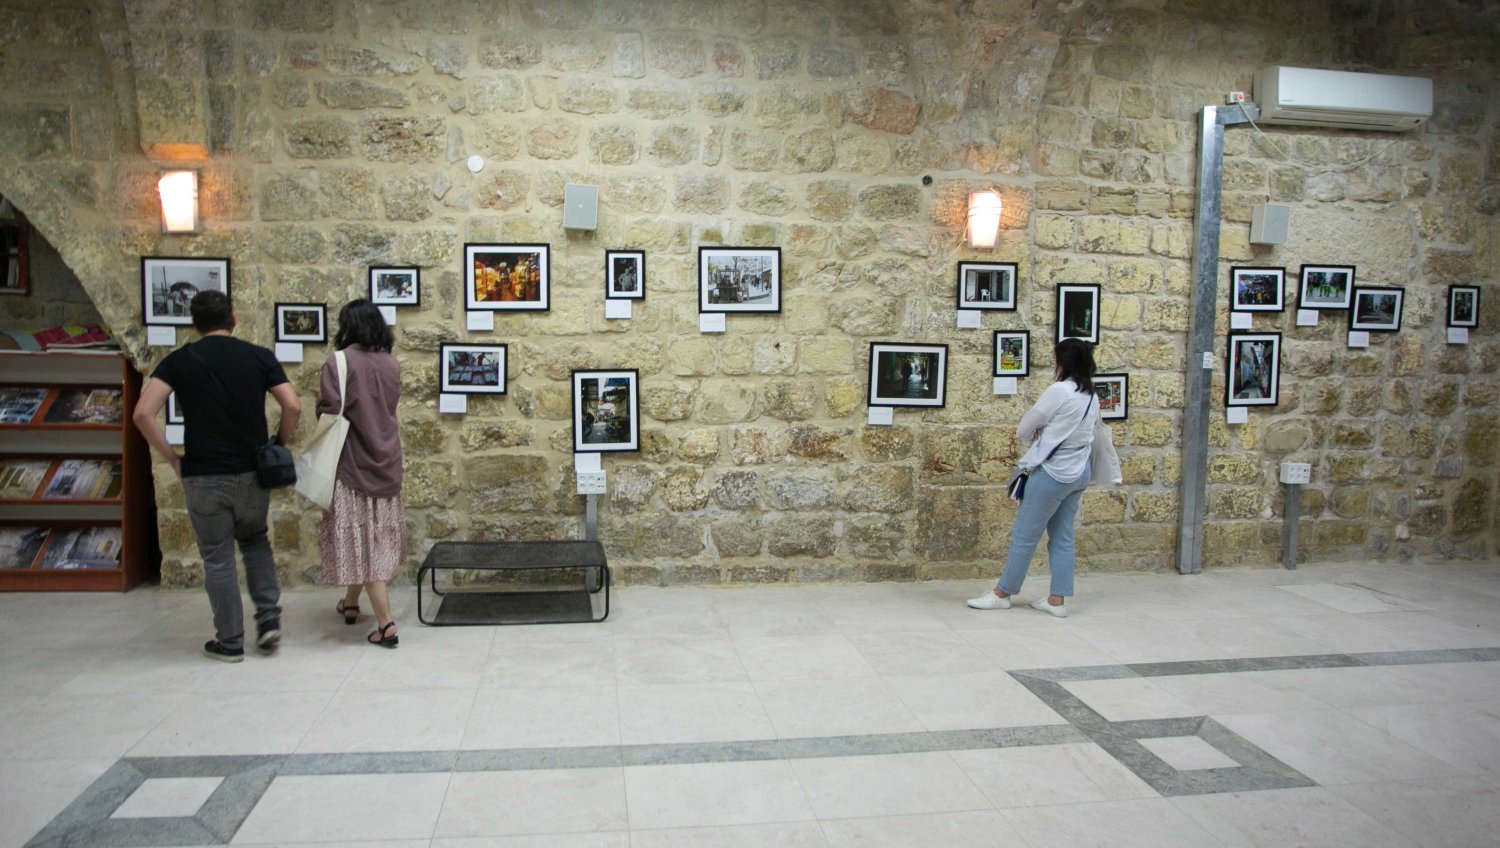 Souq Stories Exhibit opens featuring Middle Eastern markets at the African Community Society in the Old City of Jerusalem